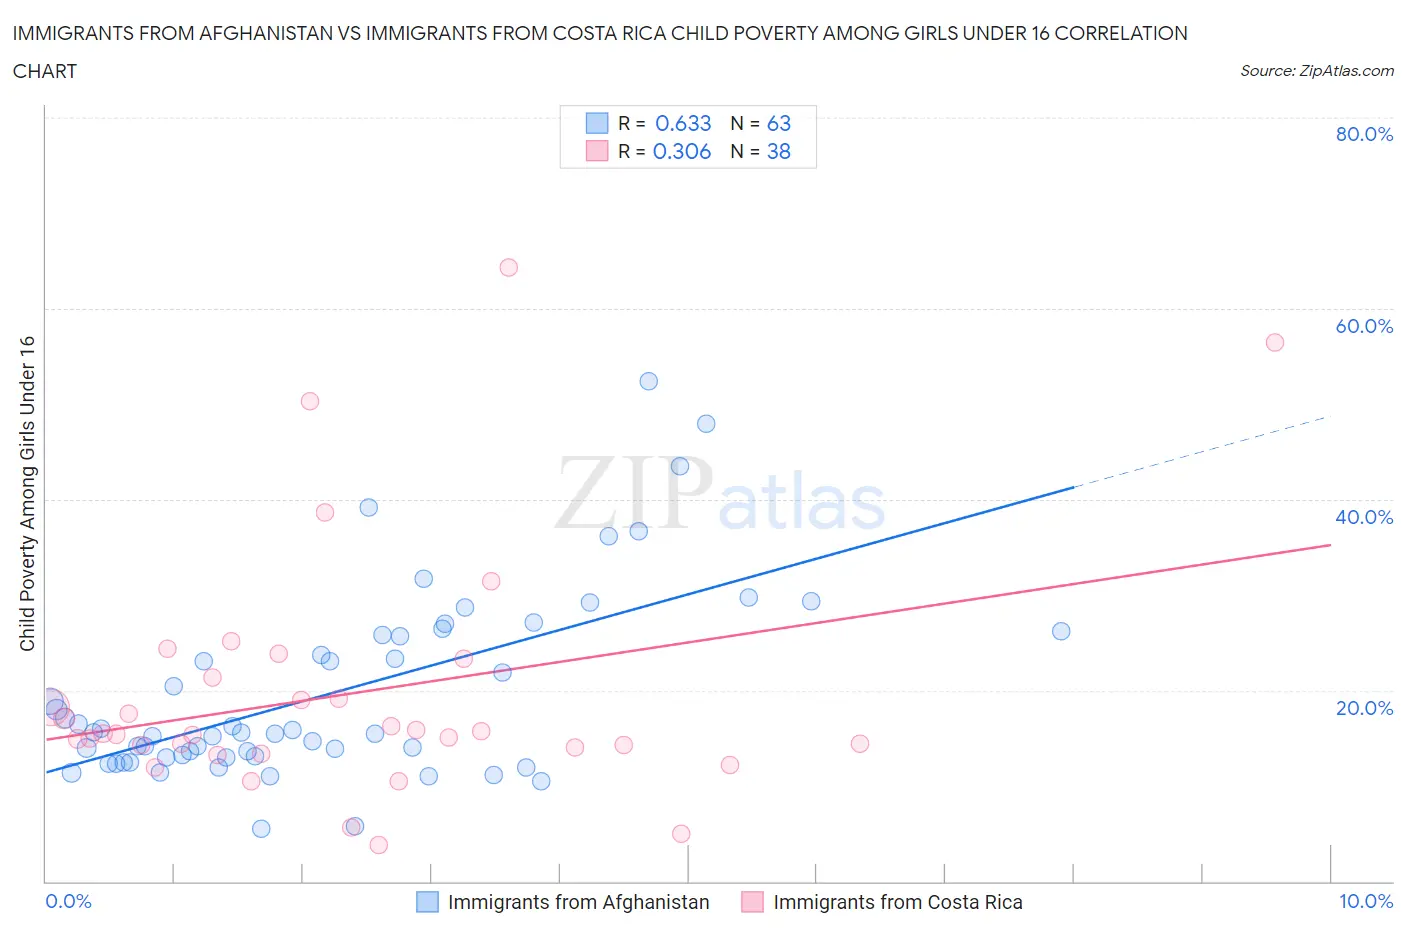 Immigrants from Afghanistan vs Immigrants from Costa Rica Child Poverty Among Girls Under 16